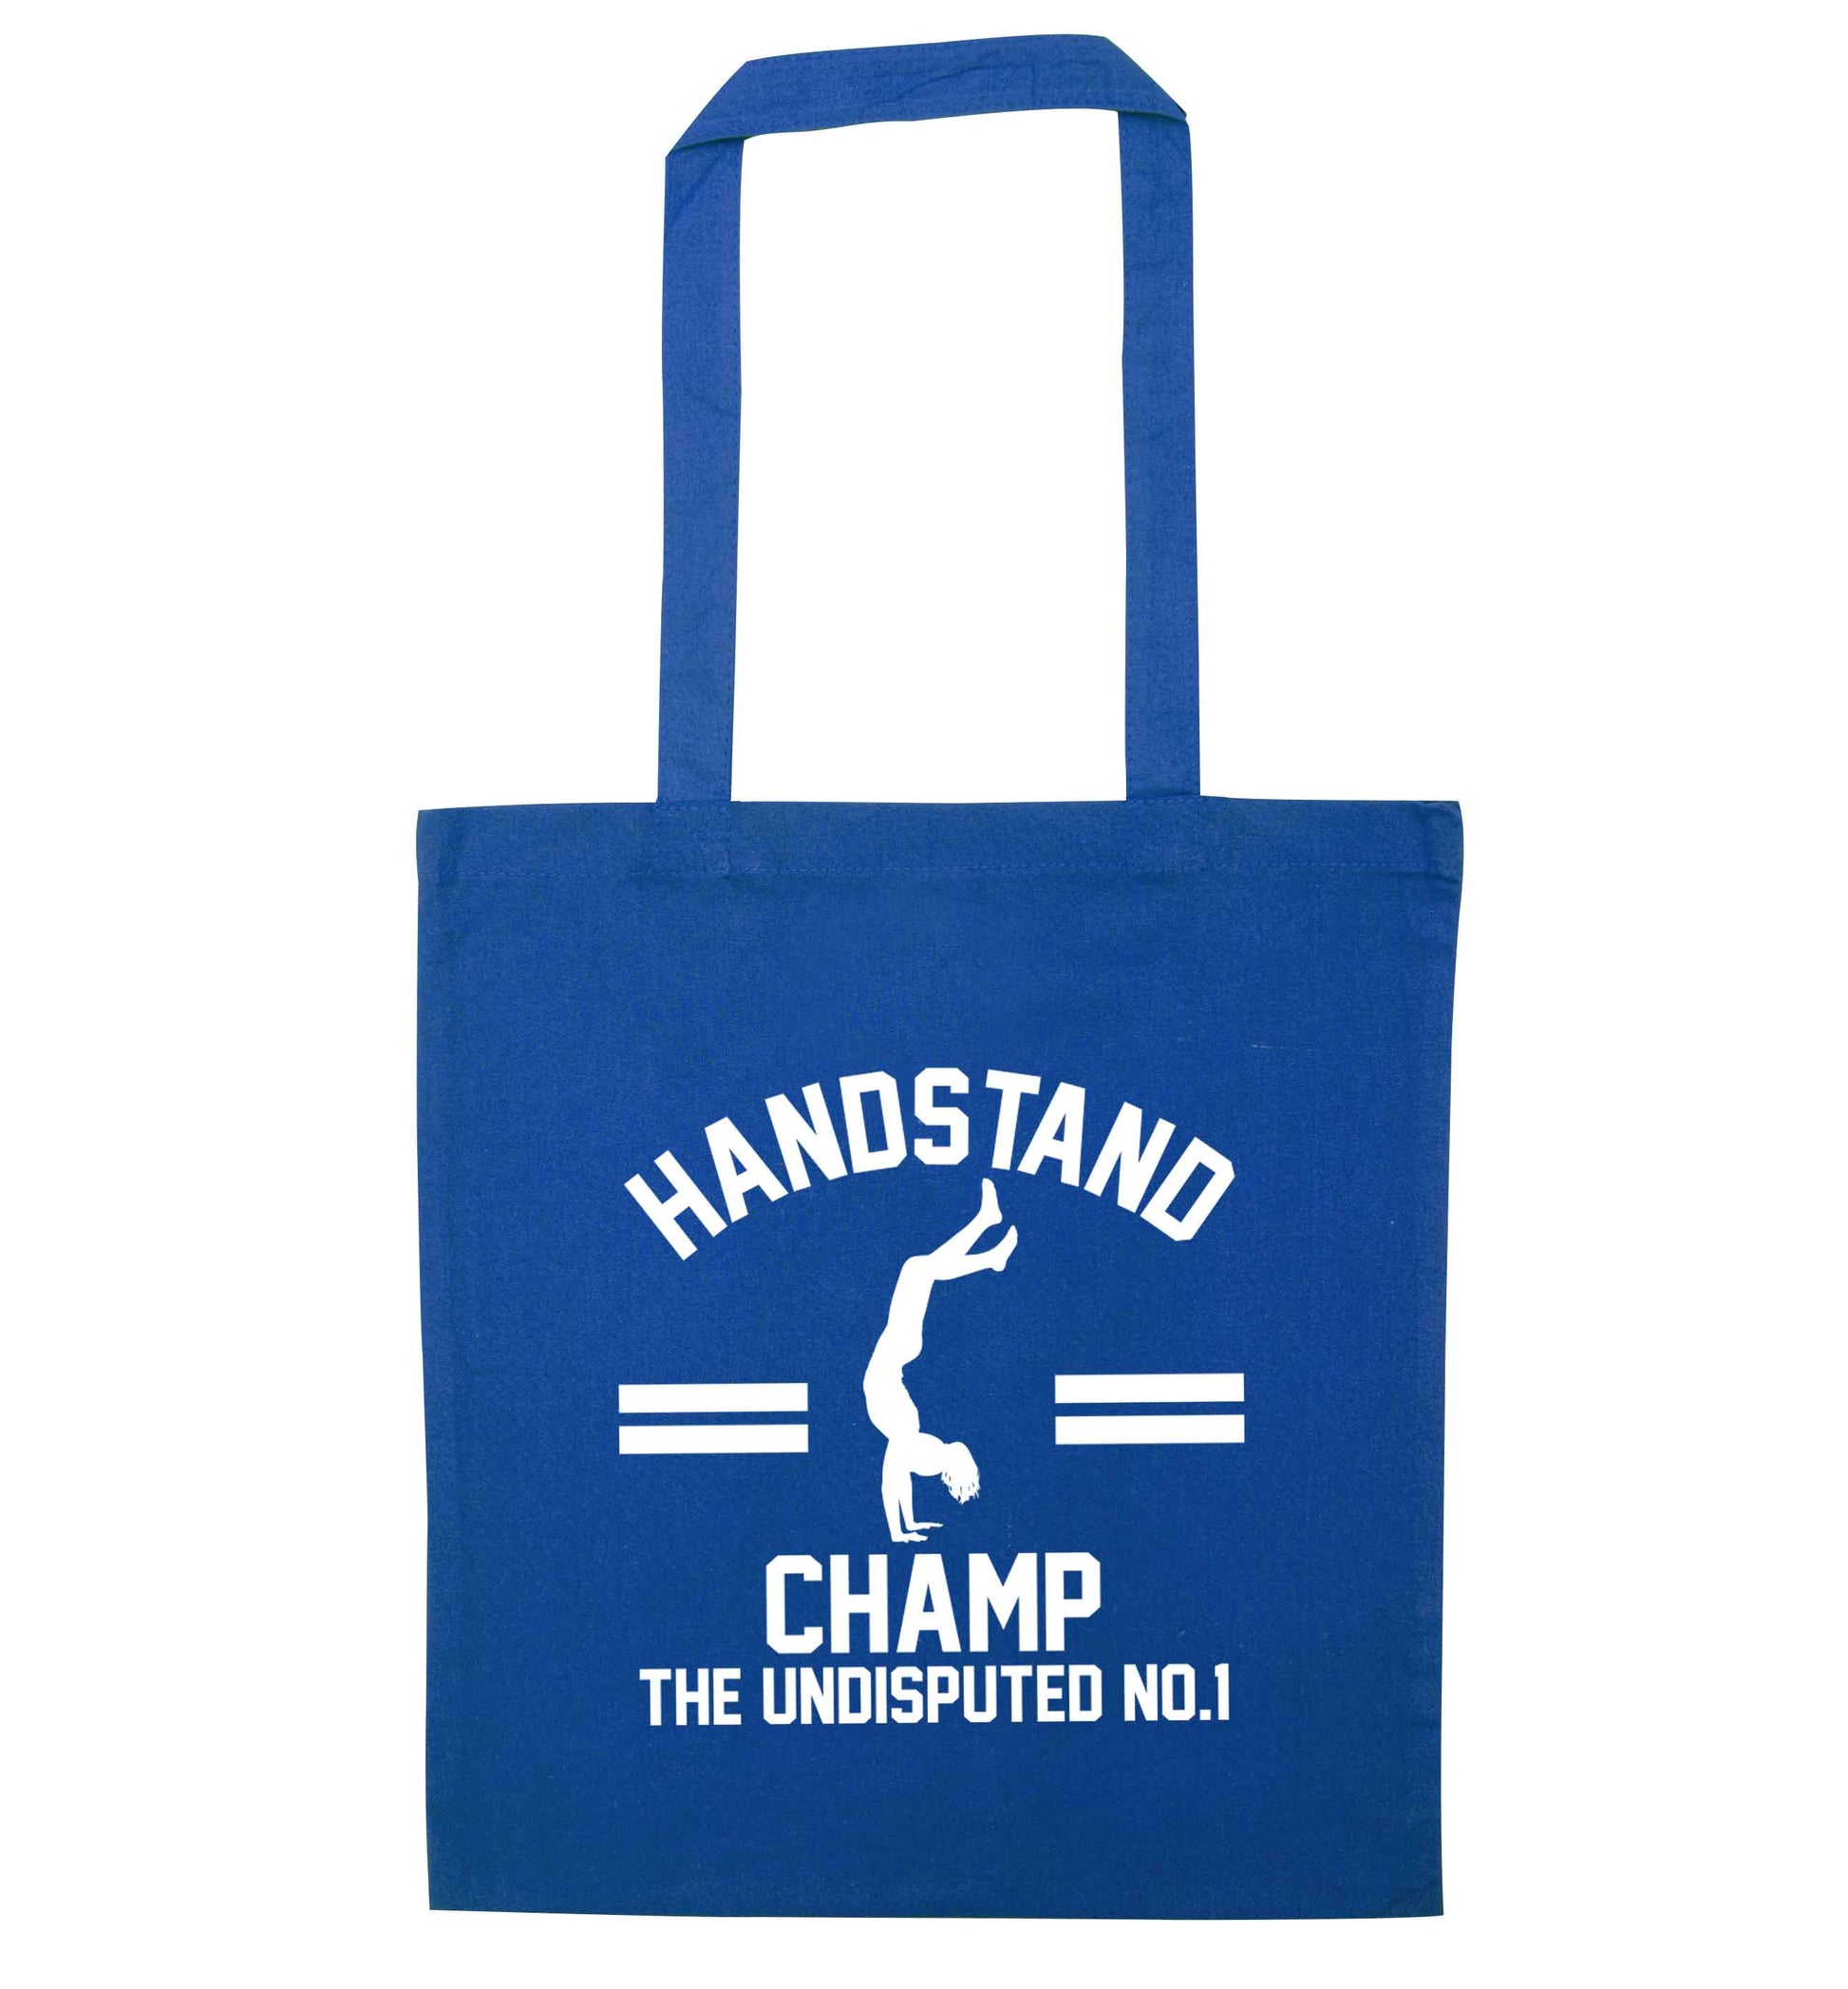 Undisputed handstand championship no.1  blue tote bag